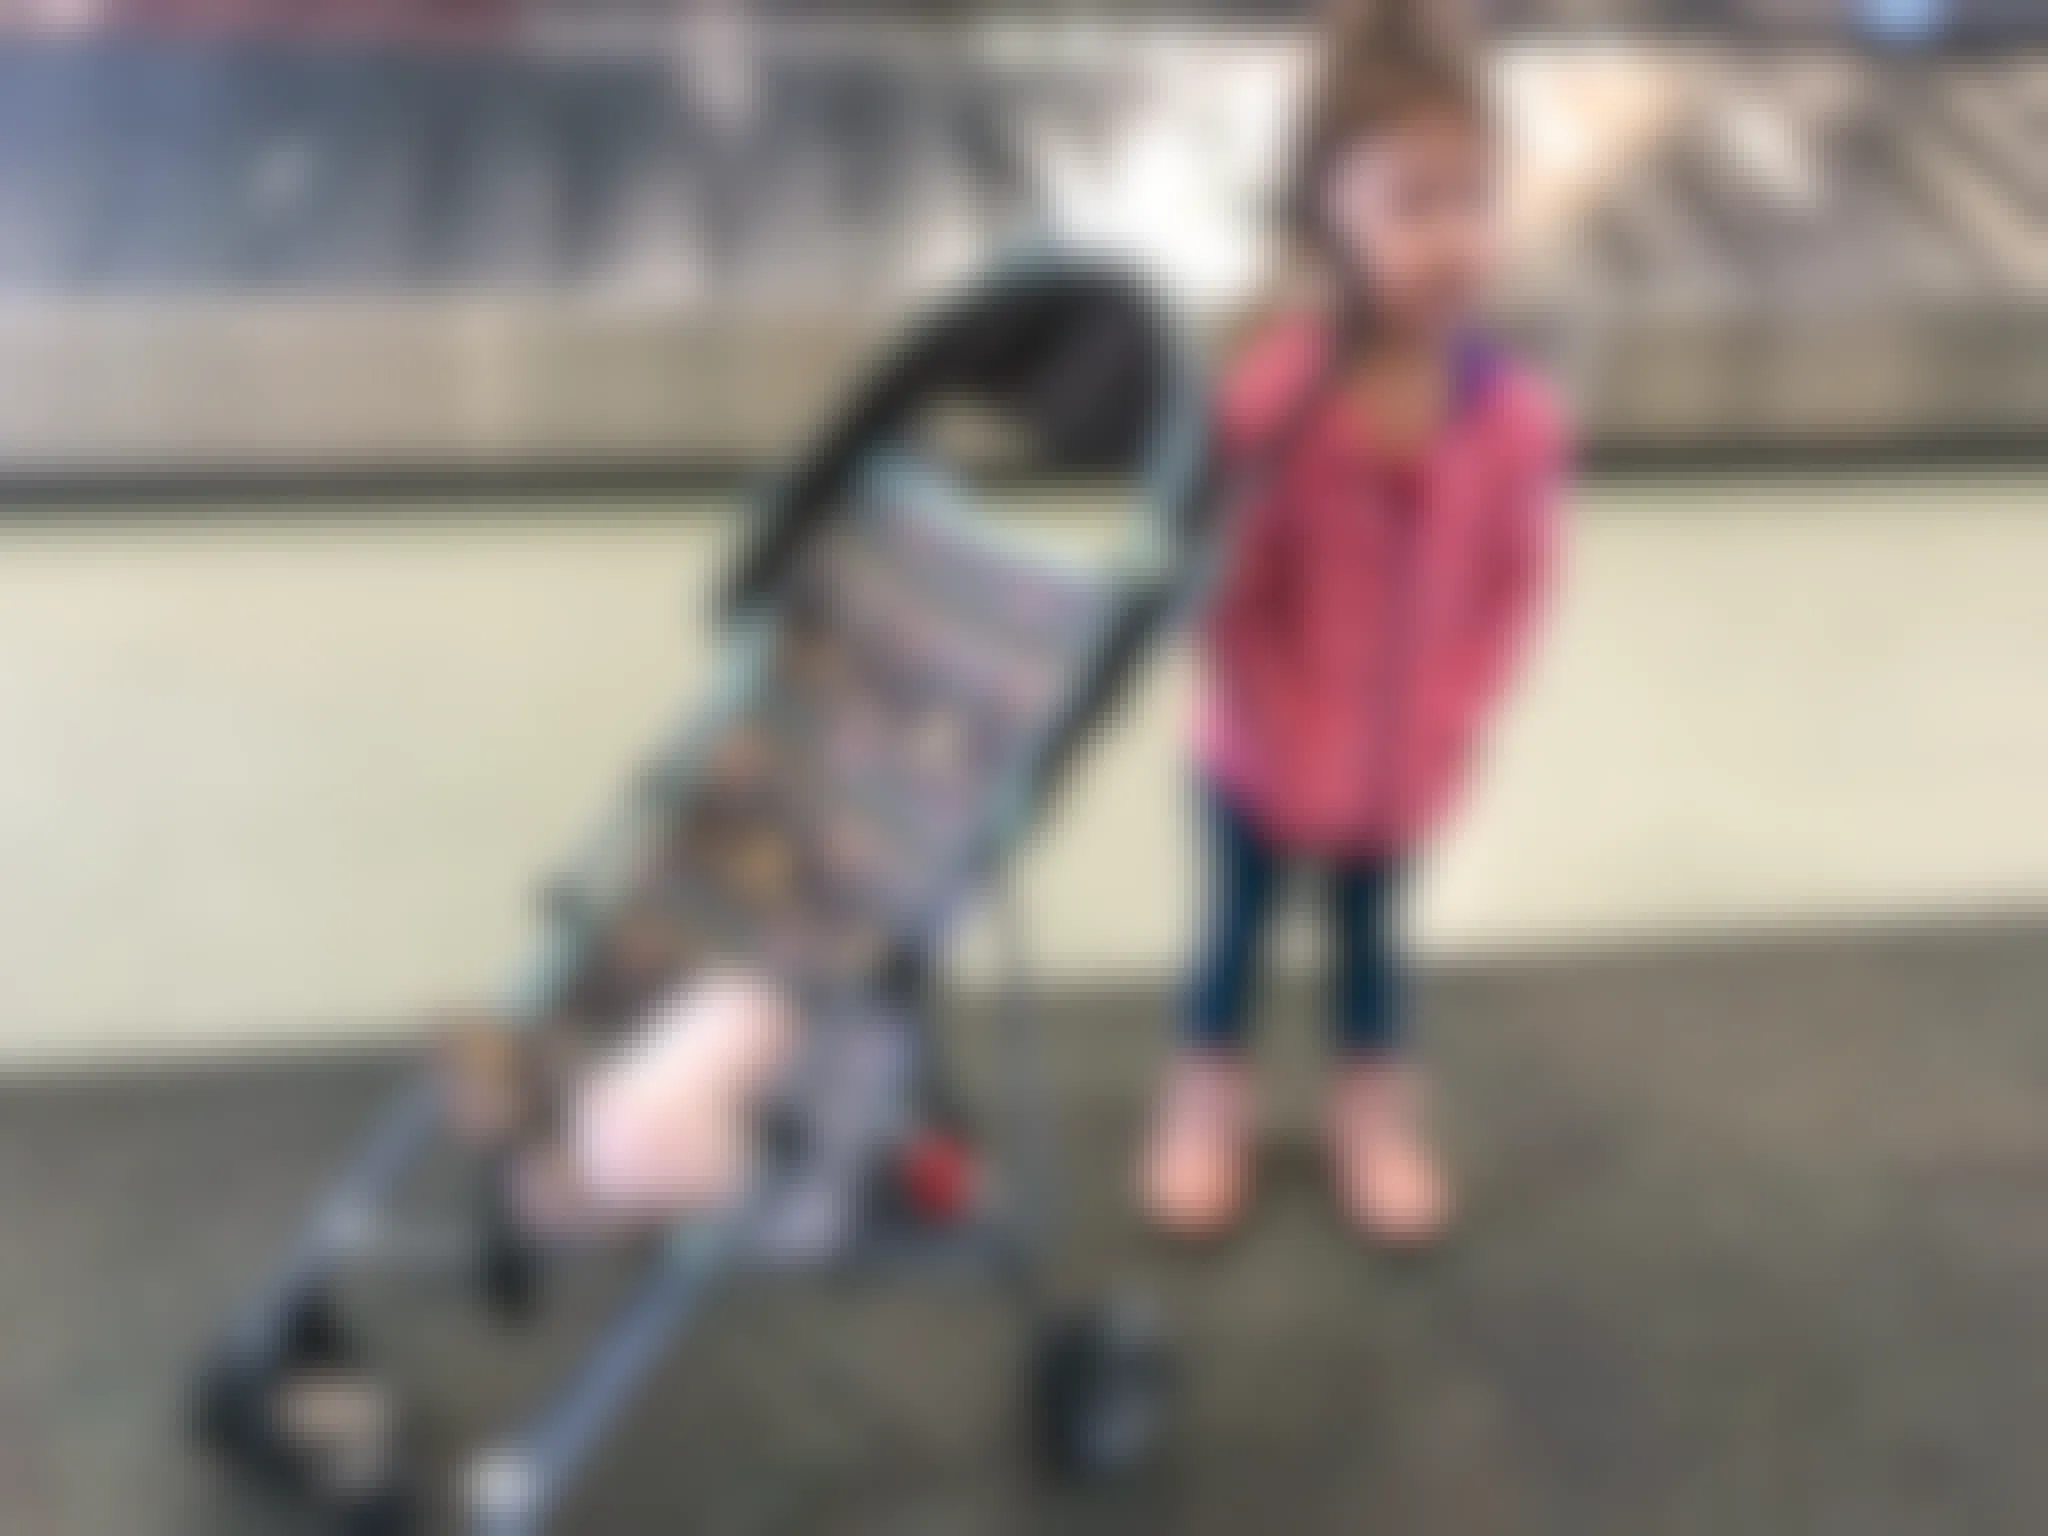 a little girl standing next to a stroller in an airport